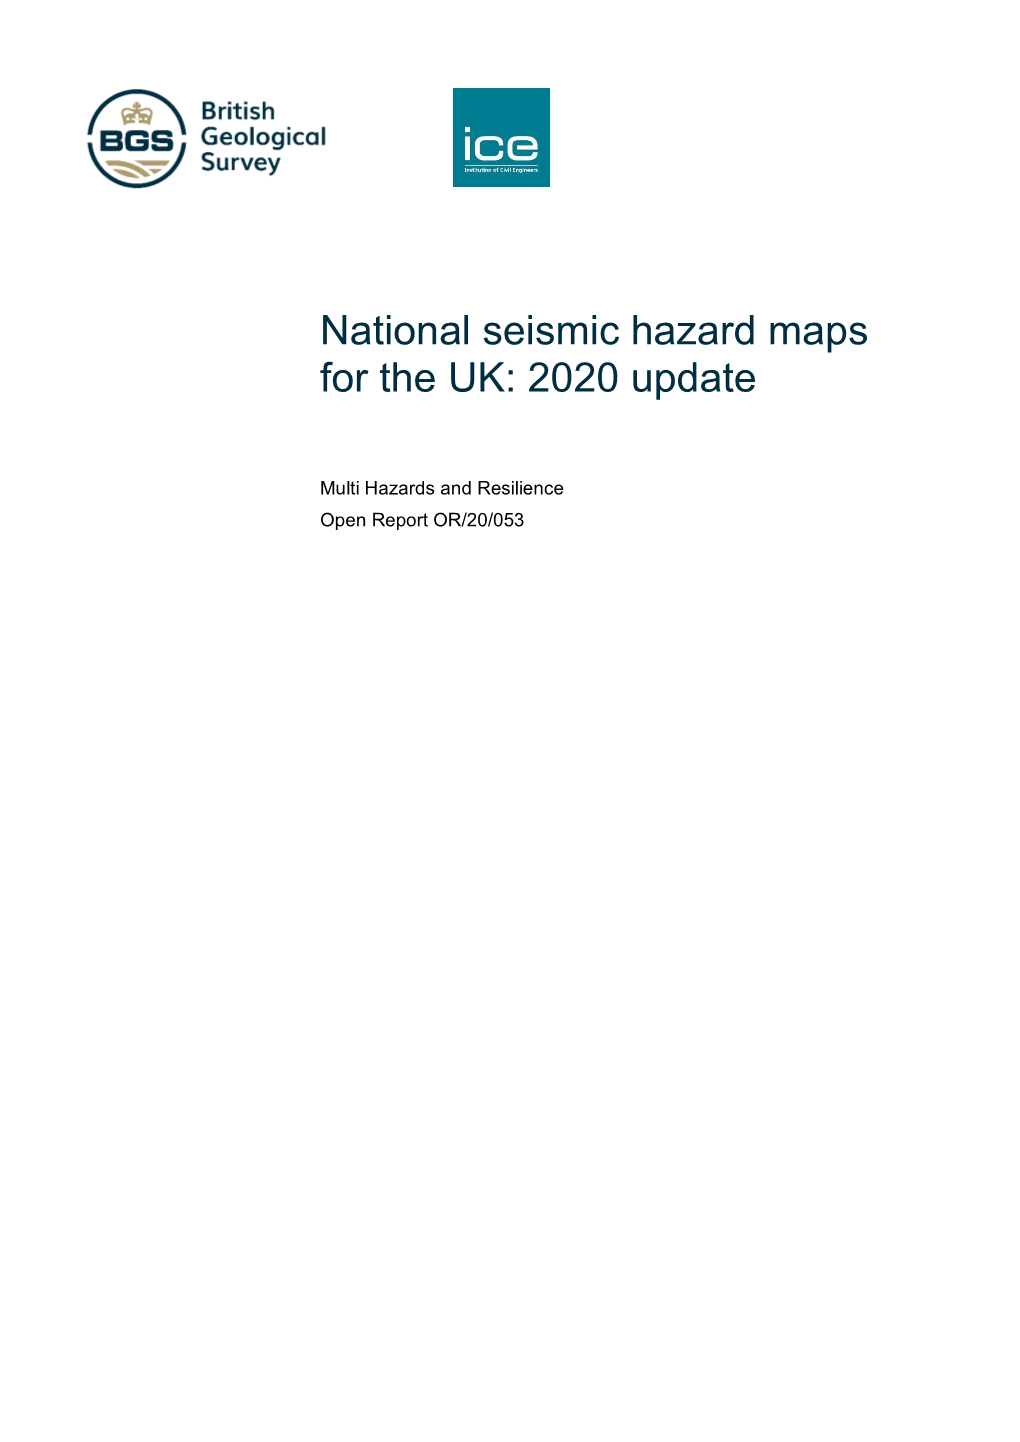 National Seismic Hazard Maps for the UK: 2020 Update